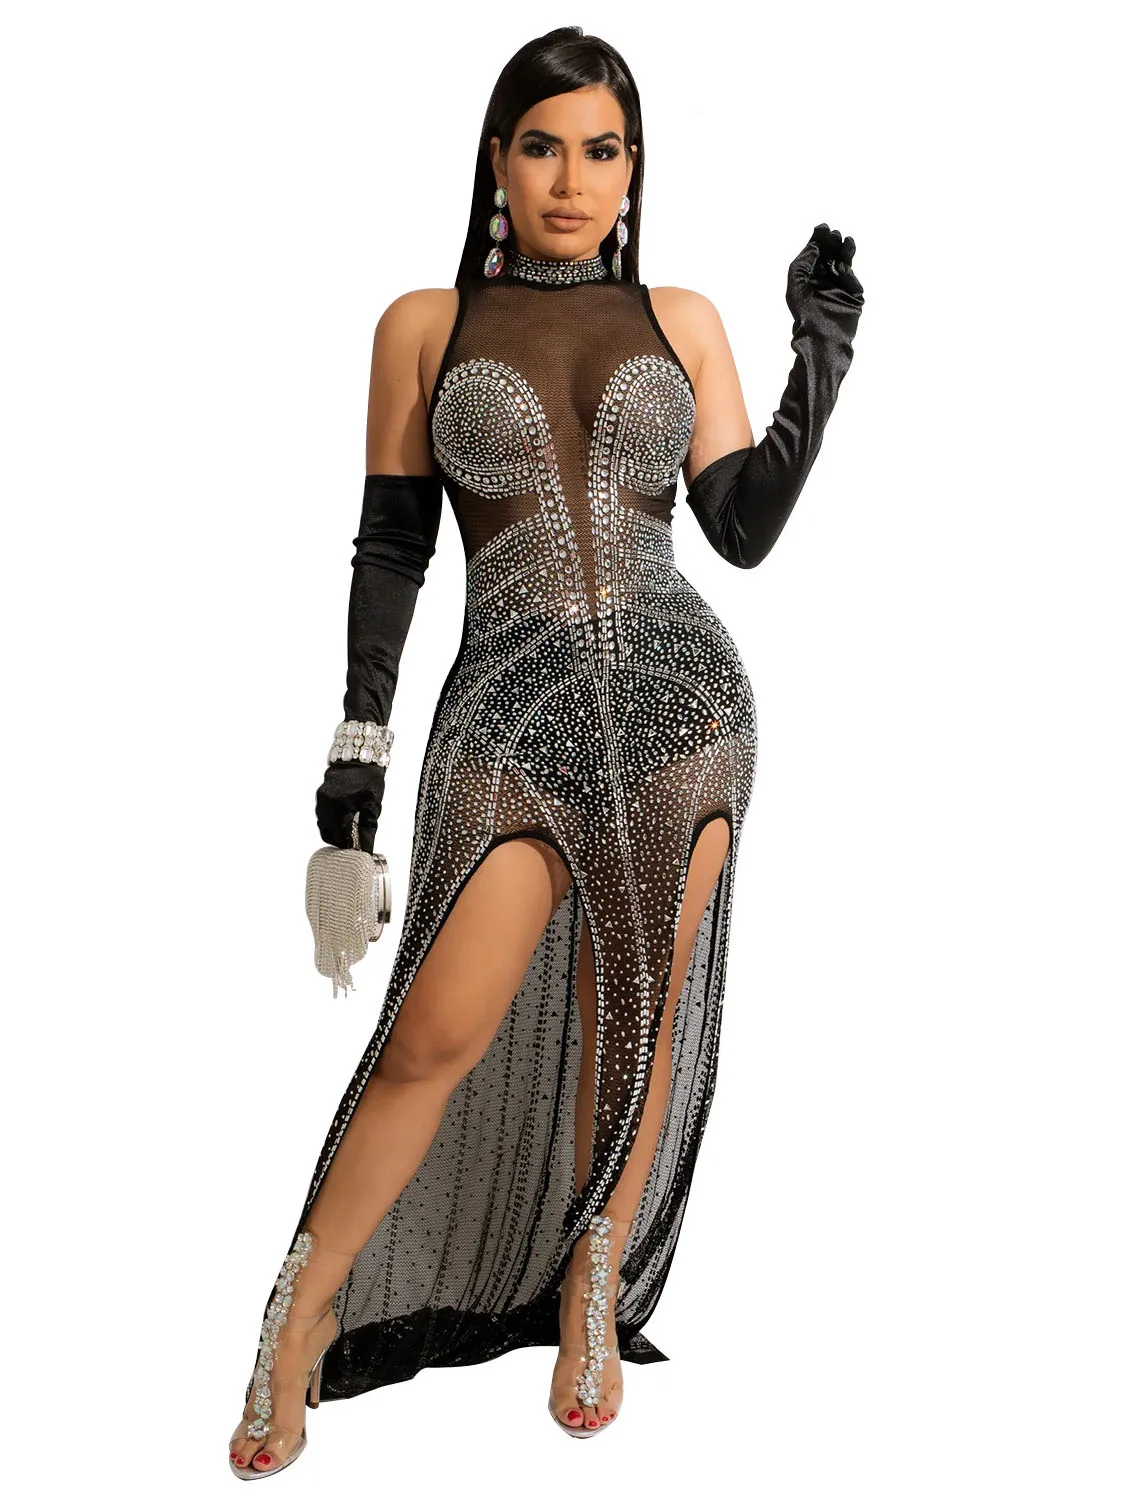 

Szkzk Mesh Rhinestone Long Maxi Dresses See Through Night Club Outfits Evening Gown For Women Party Sexy Diamond Prom Slit Dress